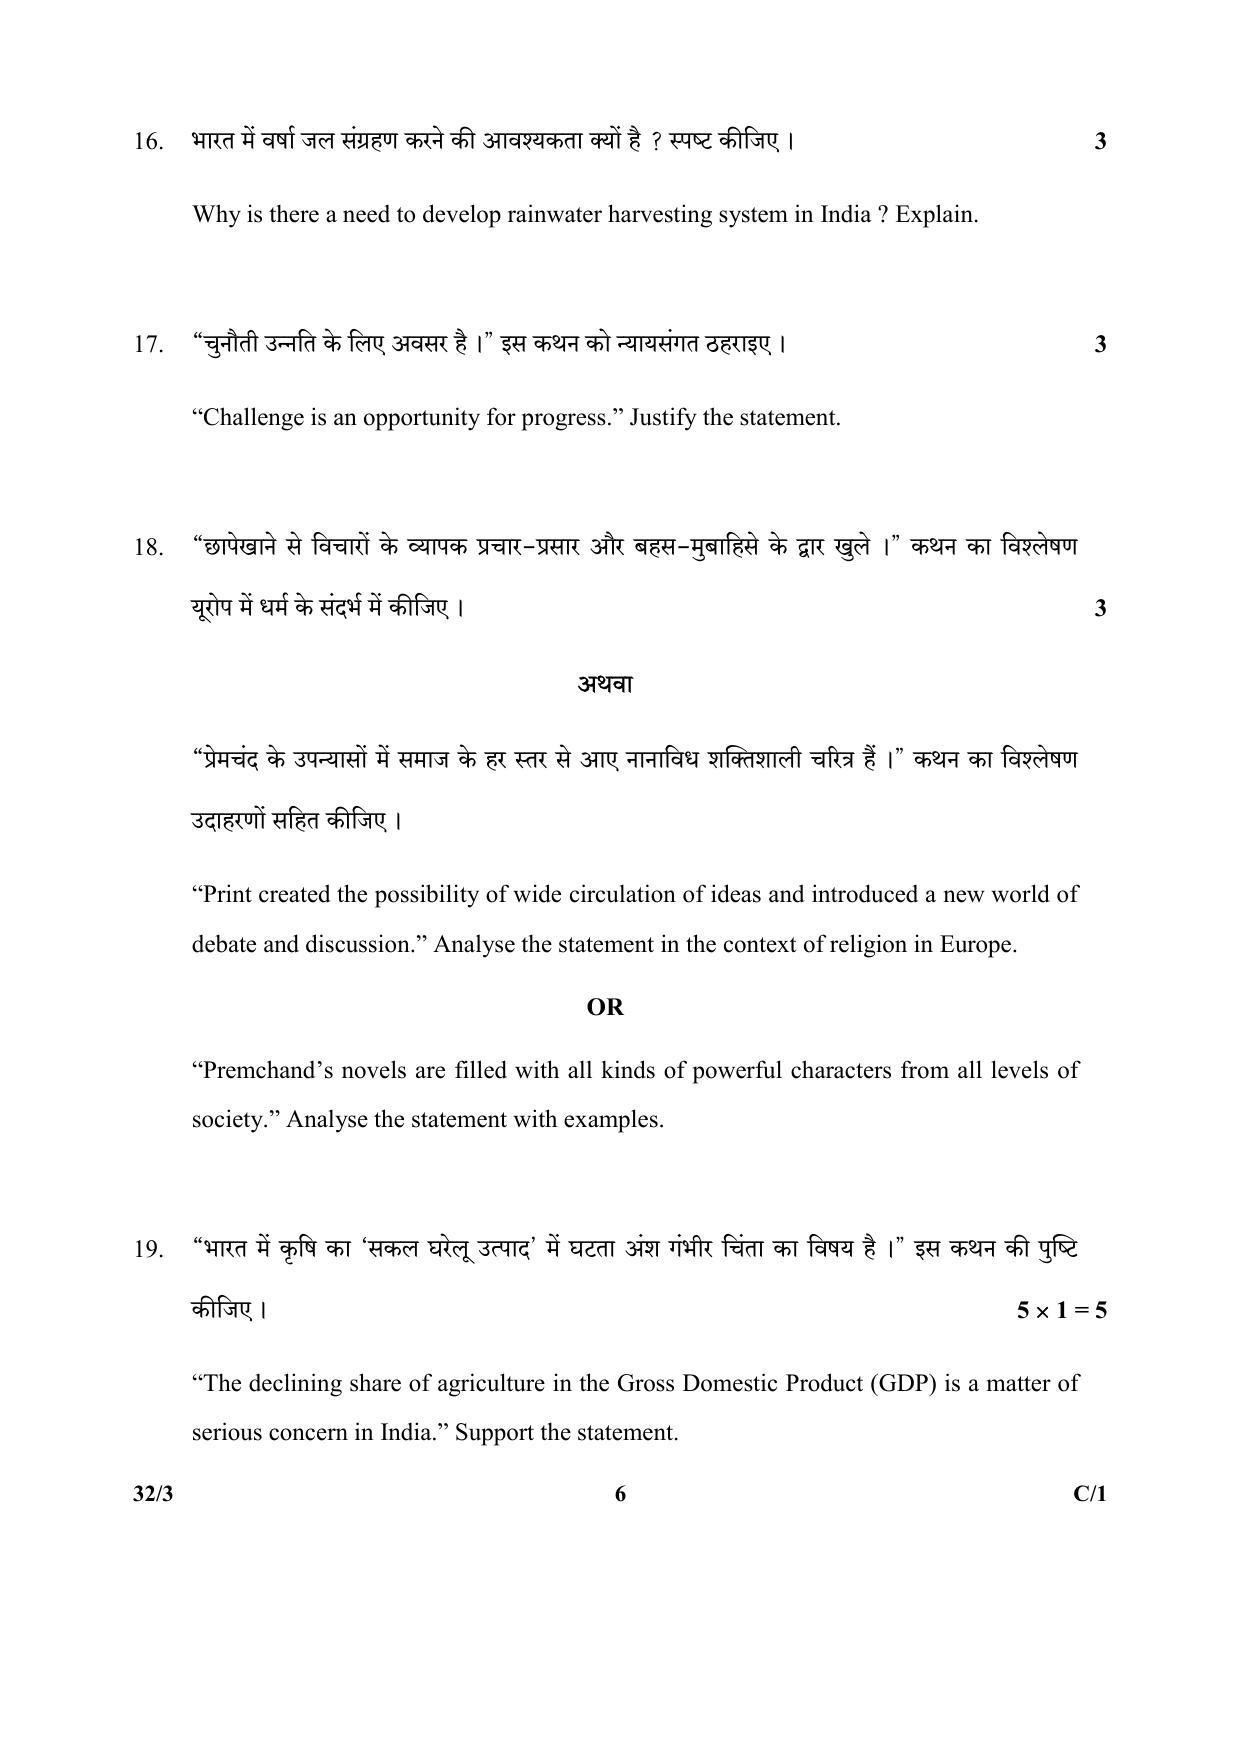 CBSE Class 10 32-3_Social Science 2018 Compartment Question Paper - Page 6